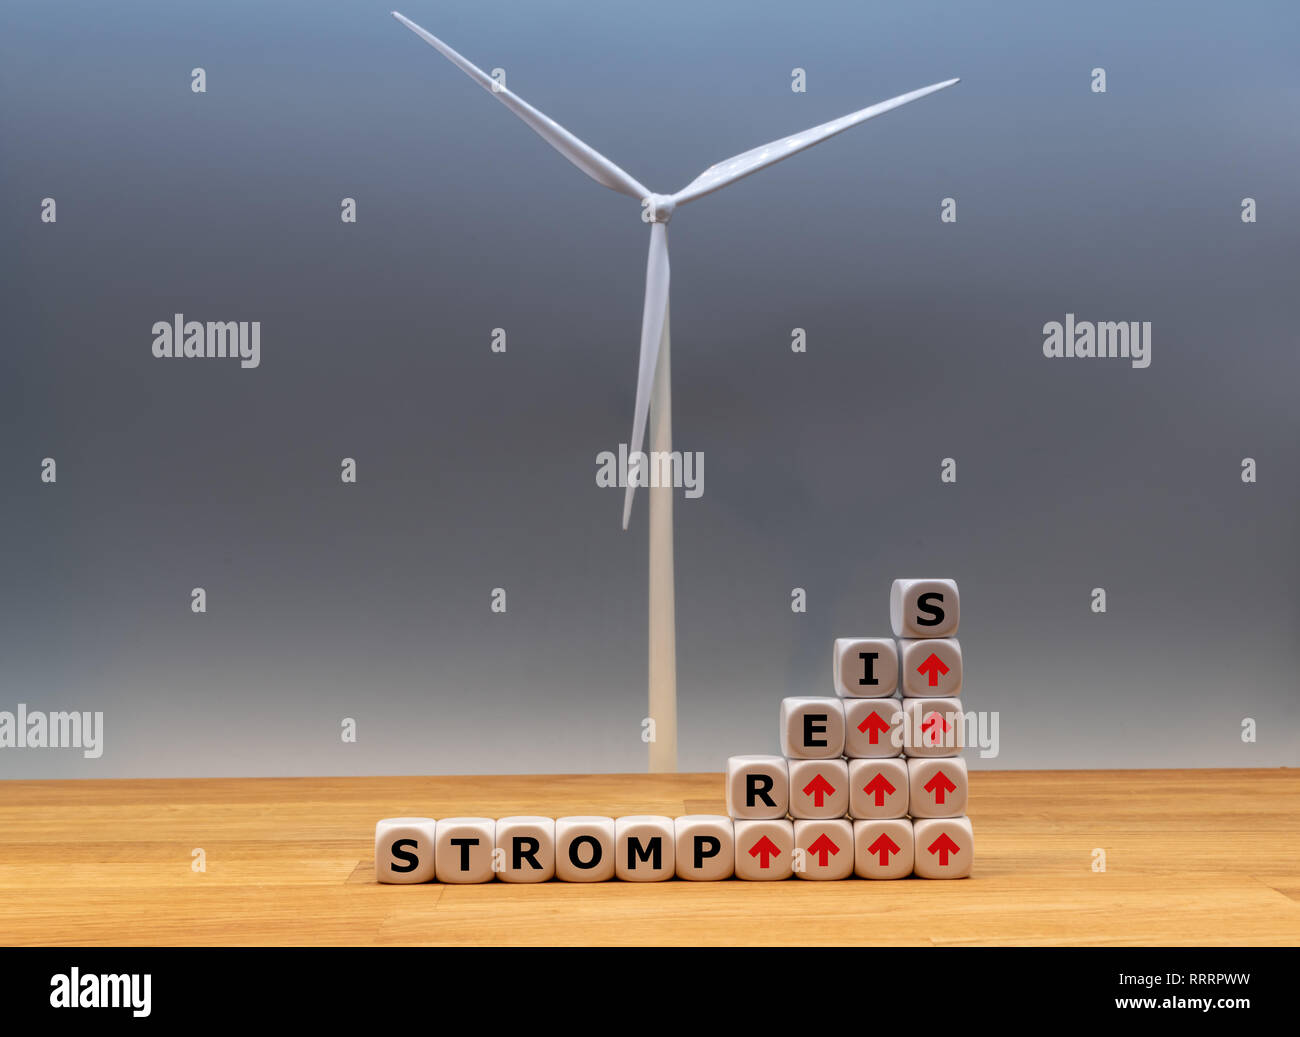 Symbol for increasing electricity rates. Dice form the German word 'Strompreis' ('electricity rate' in English) in front of a model wind turbine. Stock Photo